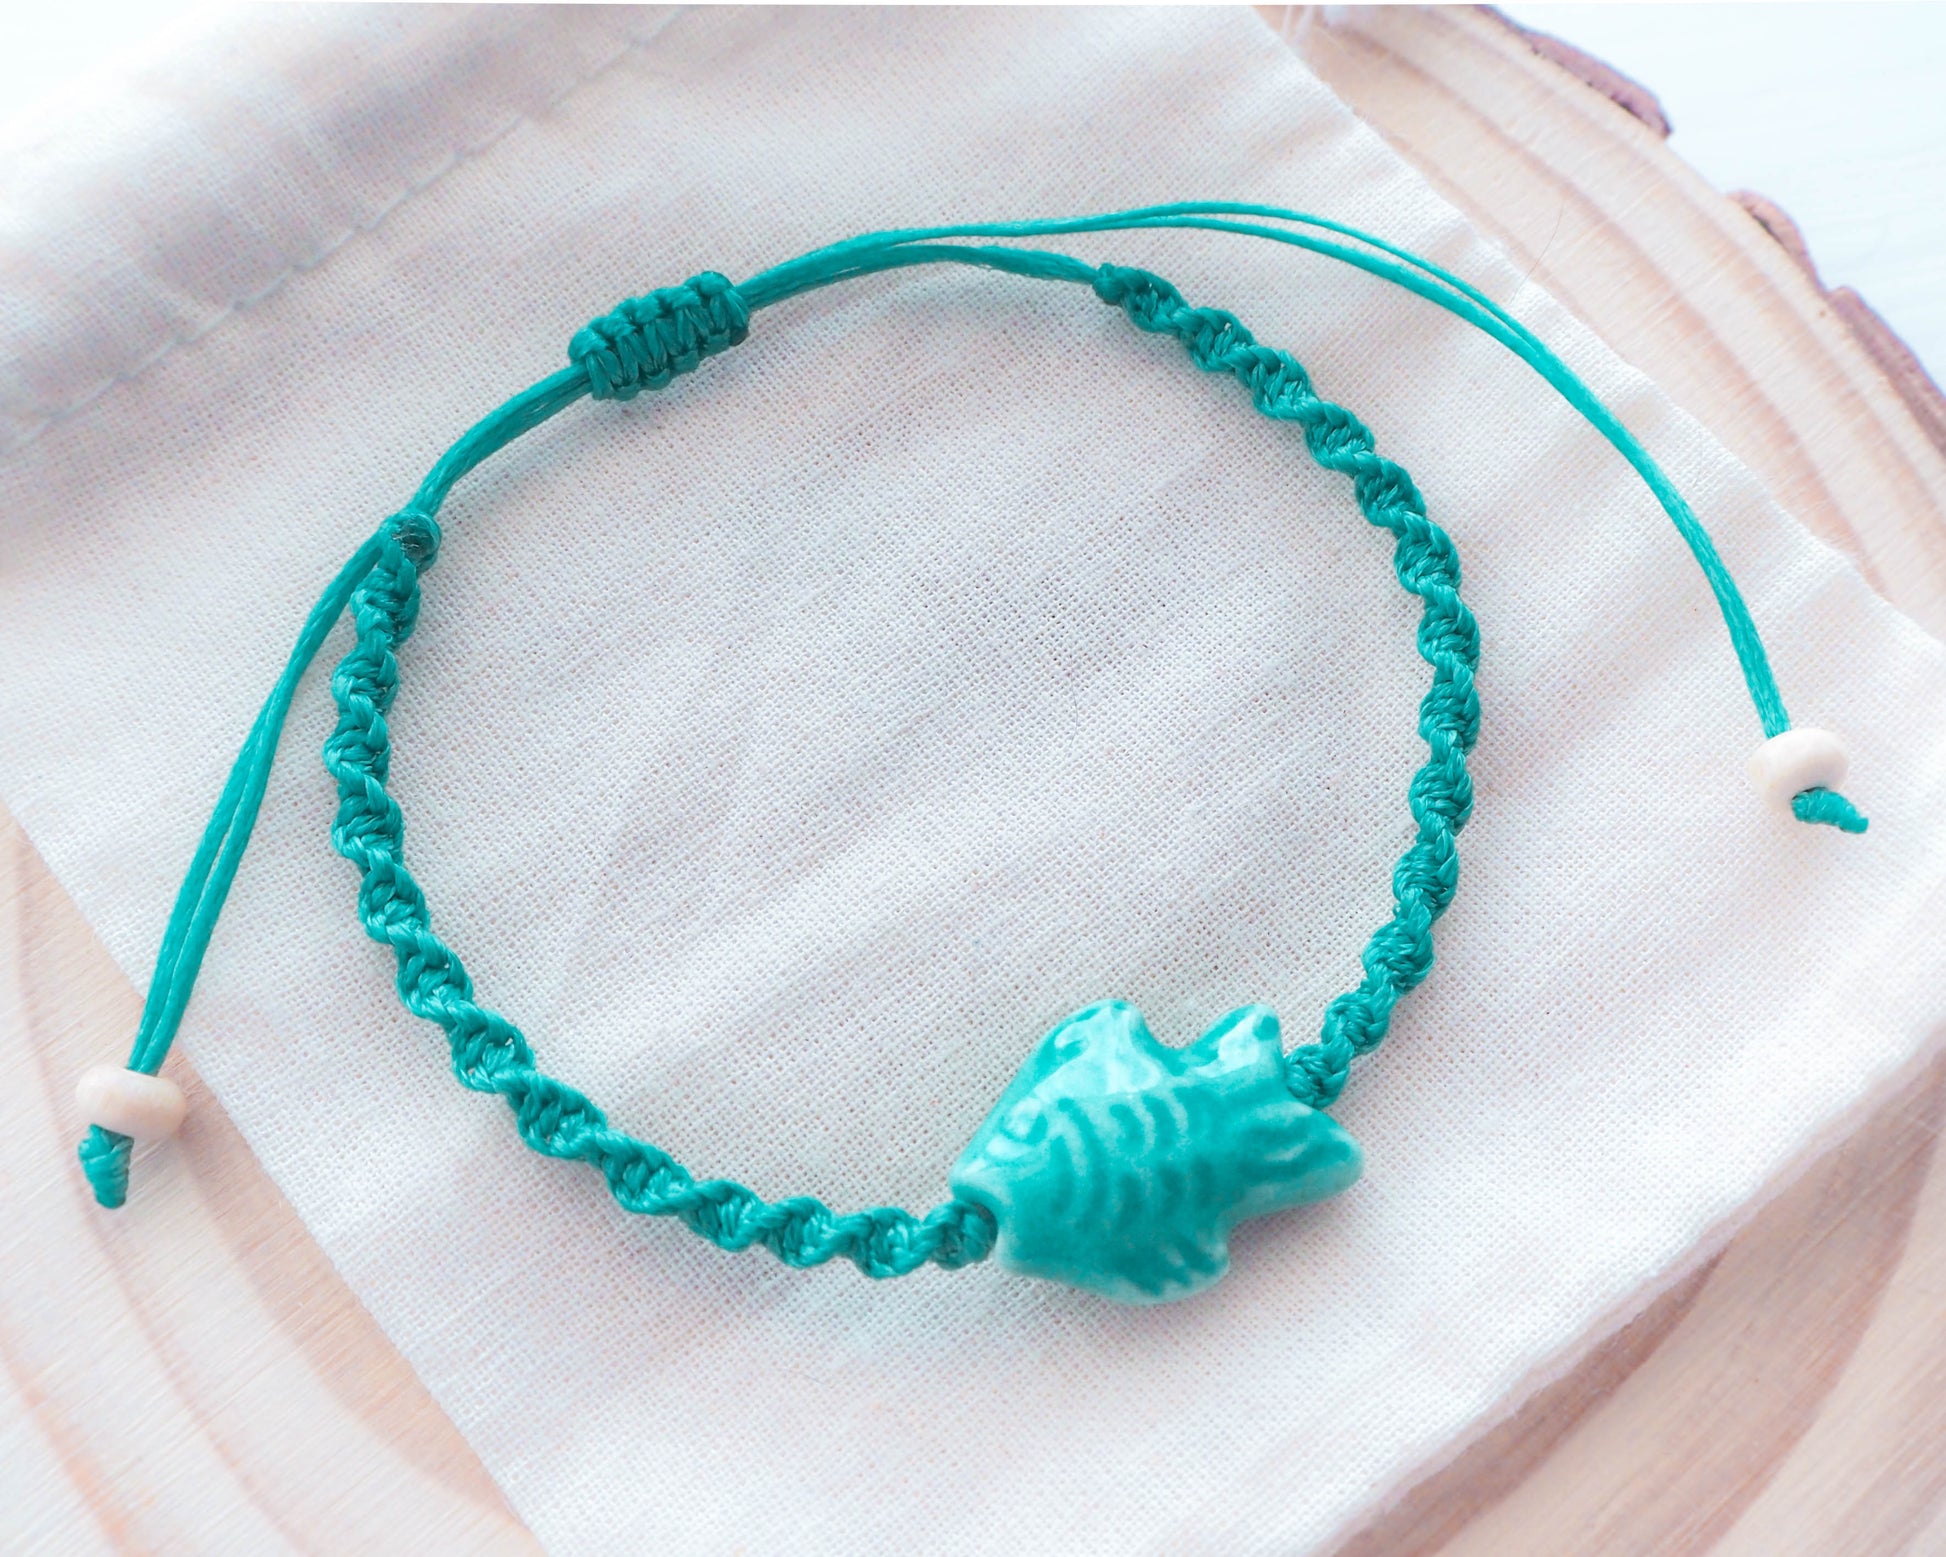 A close-up photo of the Fish Bracelet's intricate ceramic fish charm with shimmering green enamel detailing, Ceramic fish bead, green turquoise braided braccelet